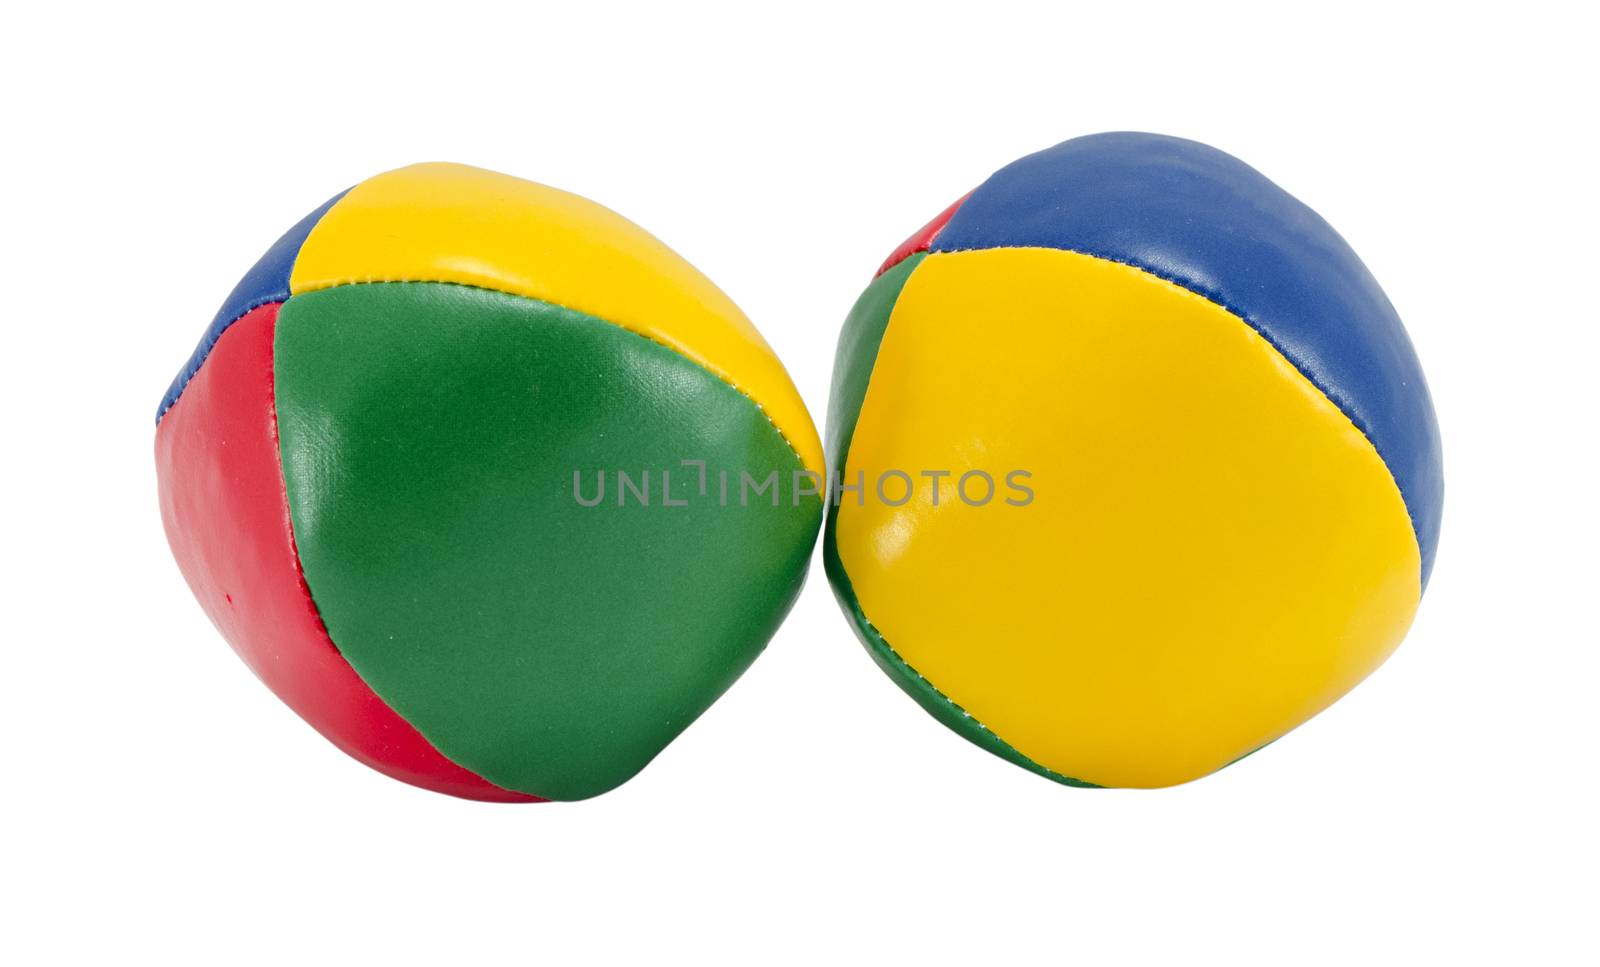 colorful soft juggle ball toys isolated on white background.